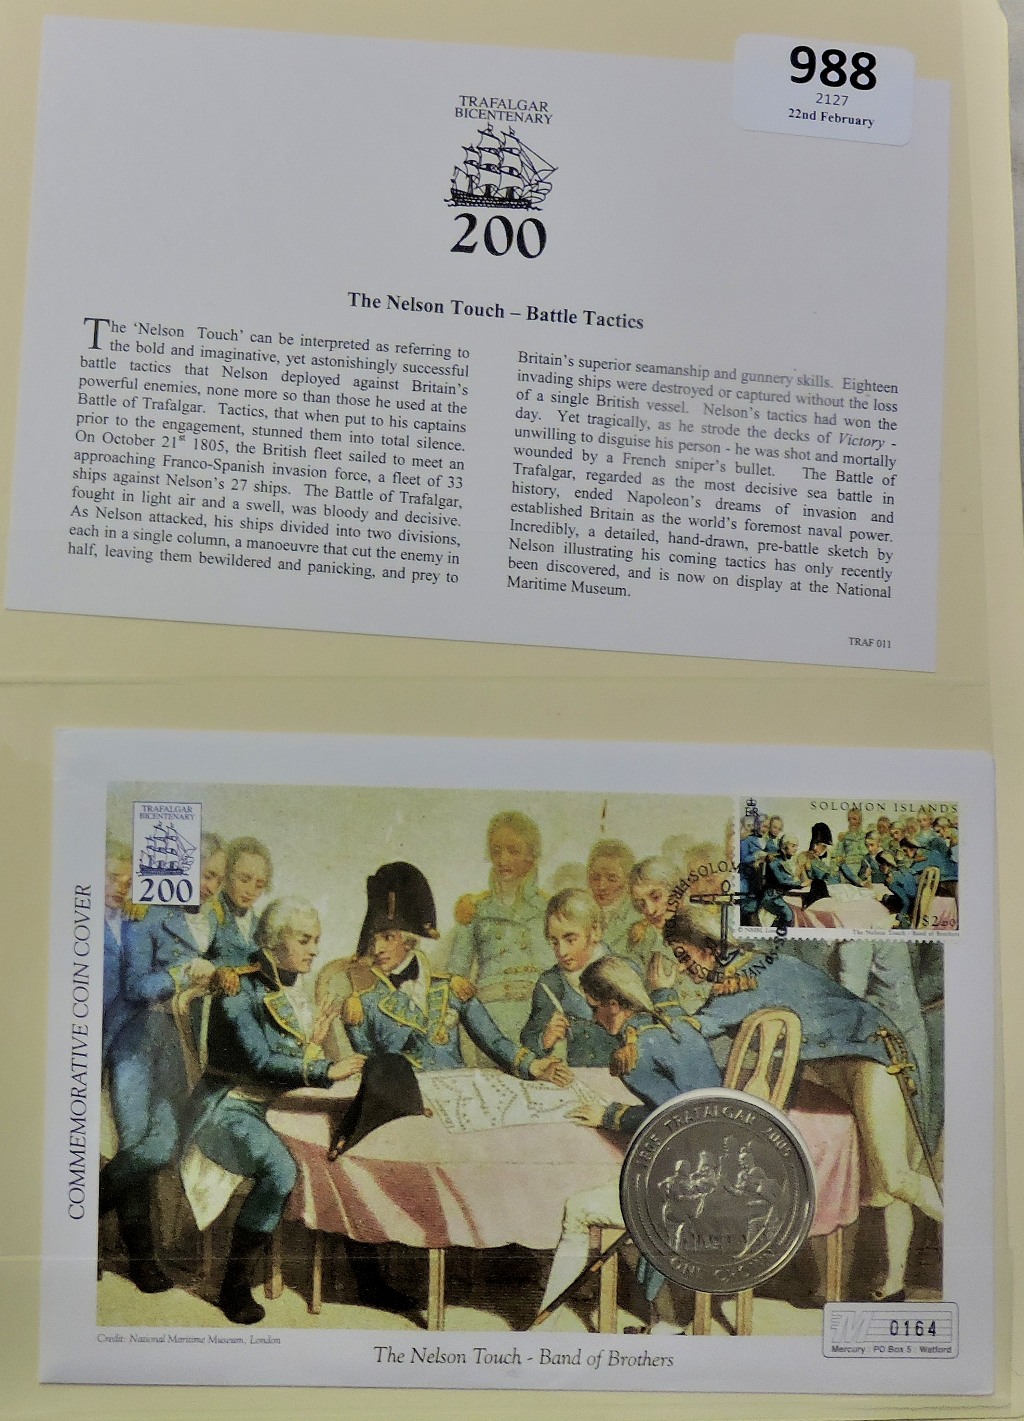 2005-Trafalgar Bicentenary, The Nelson Touch, Commemorative coin cover with Gibraltar crown